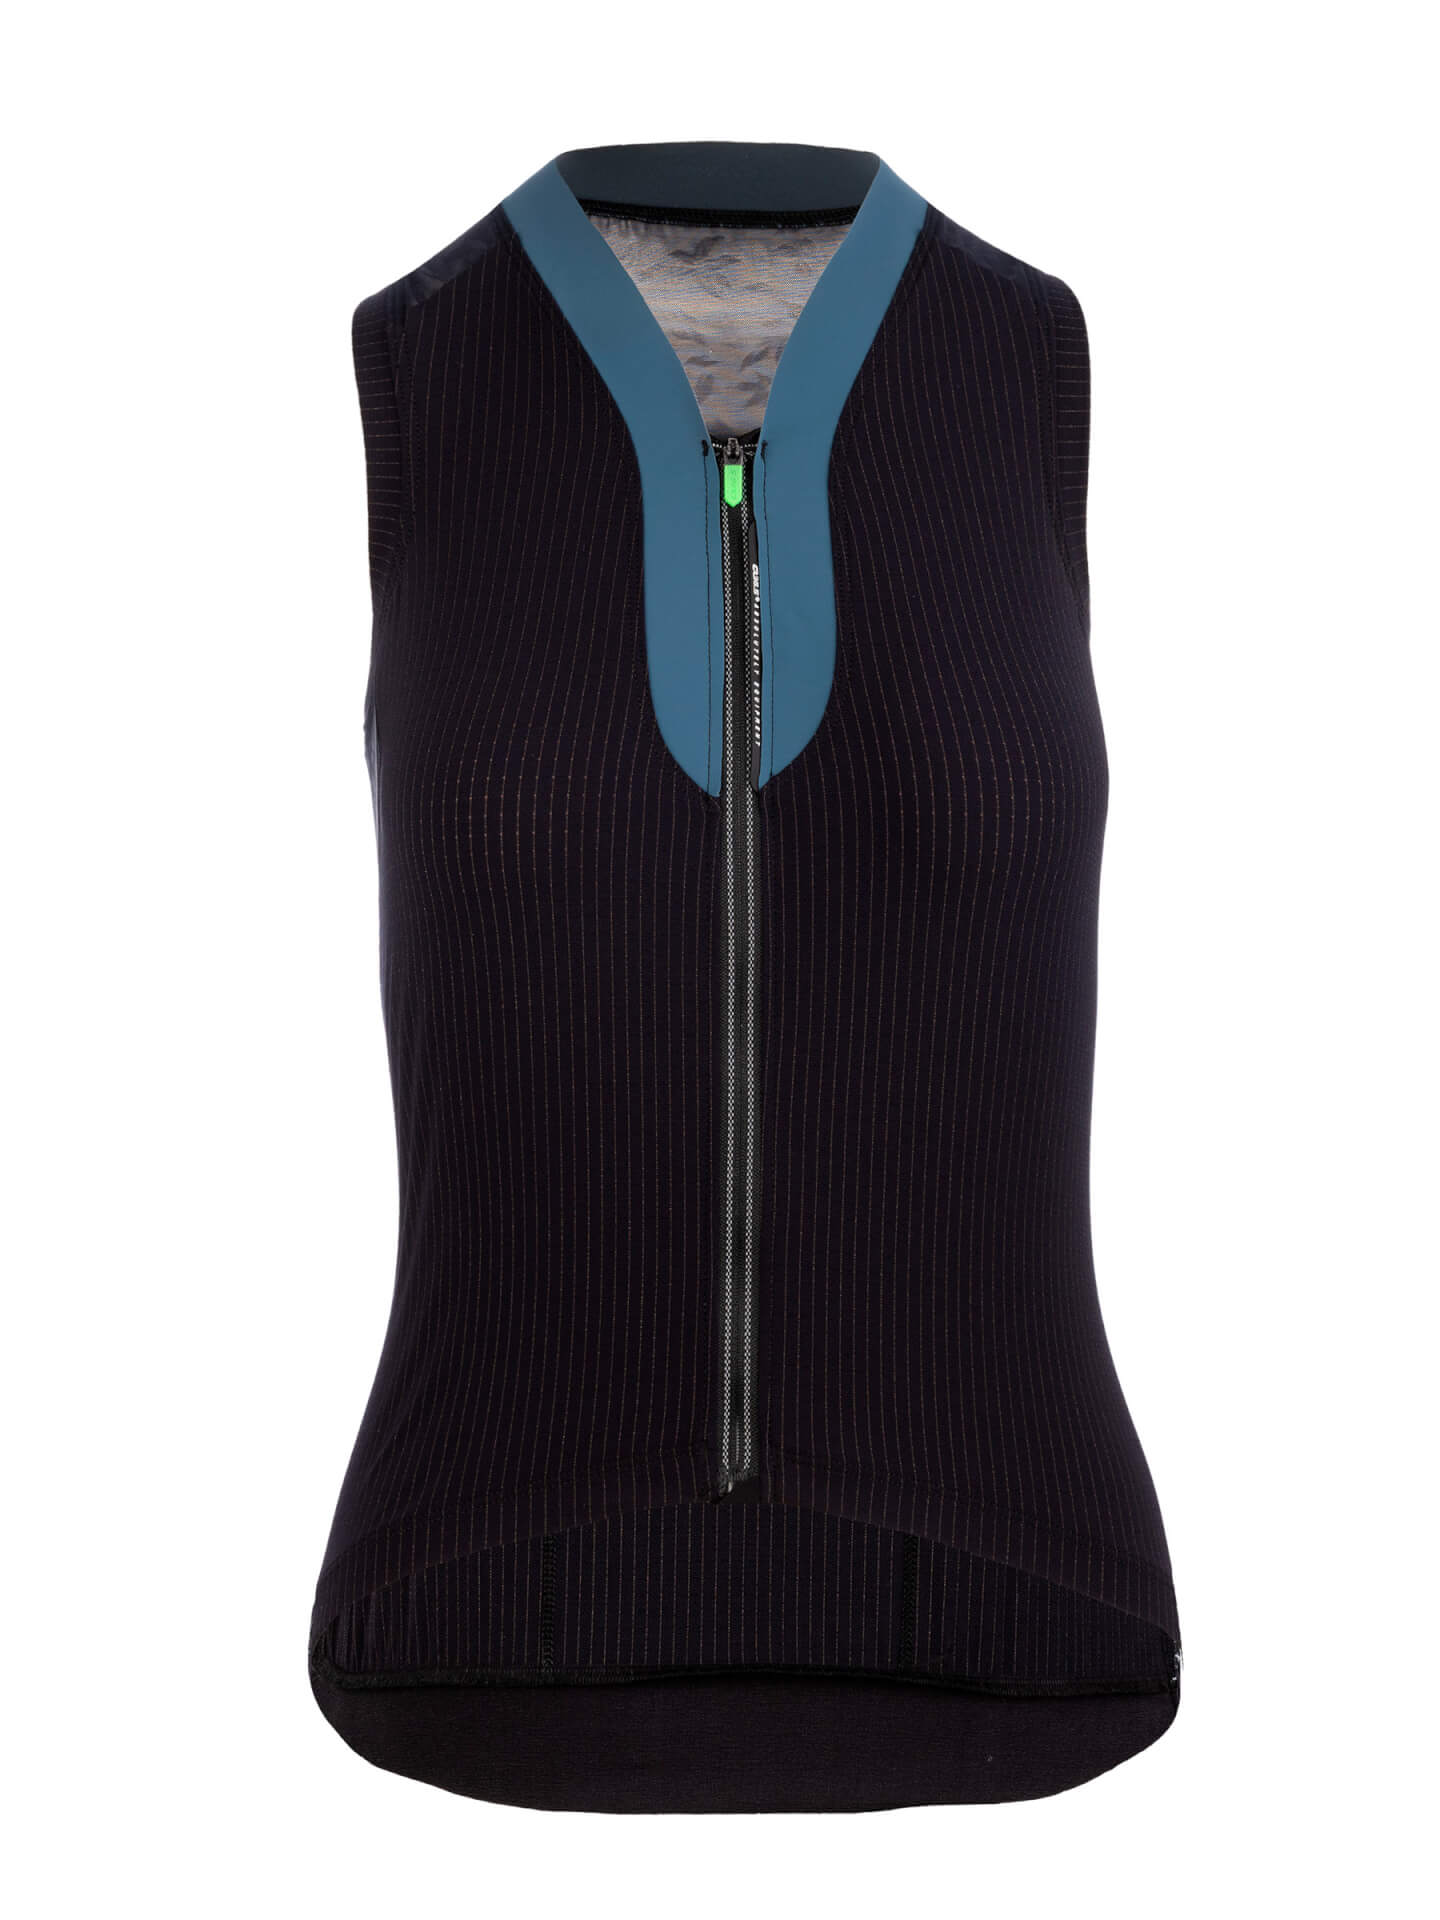 Q36.5 Jersey Sleeveless L1 Pinstripe - Maillot ciclismo - Mujer